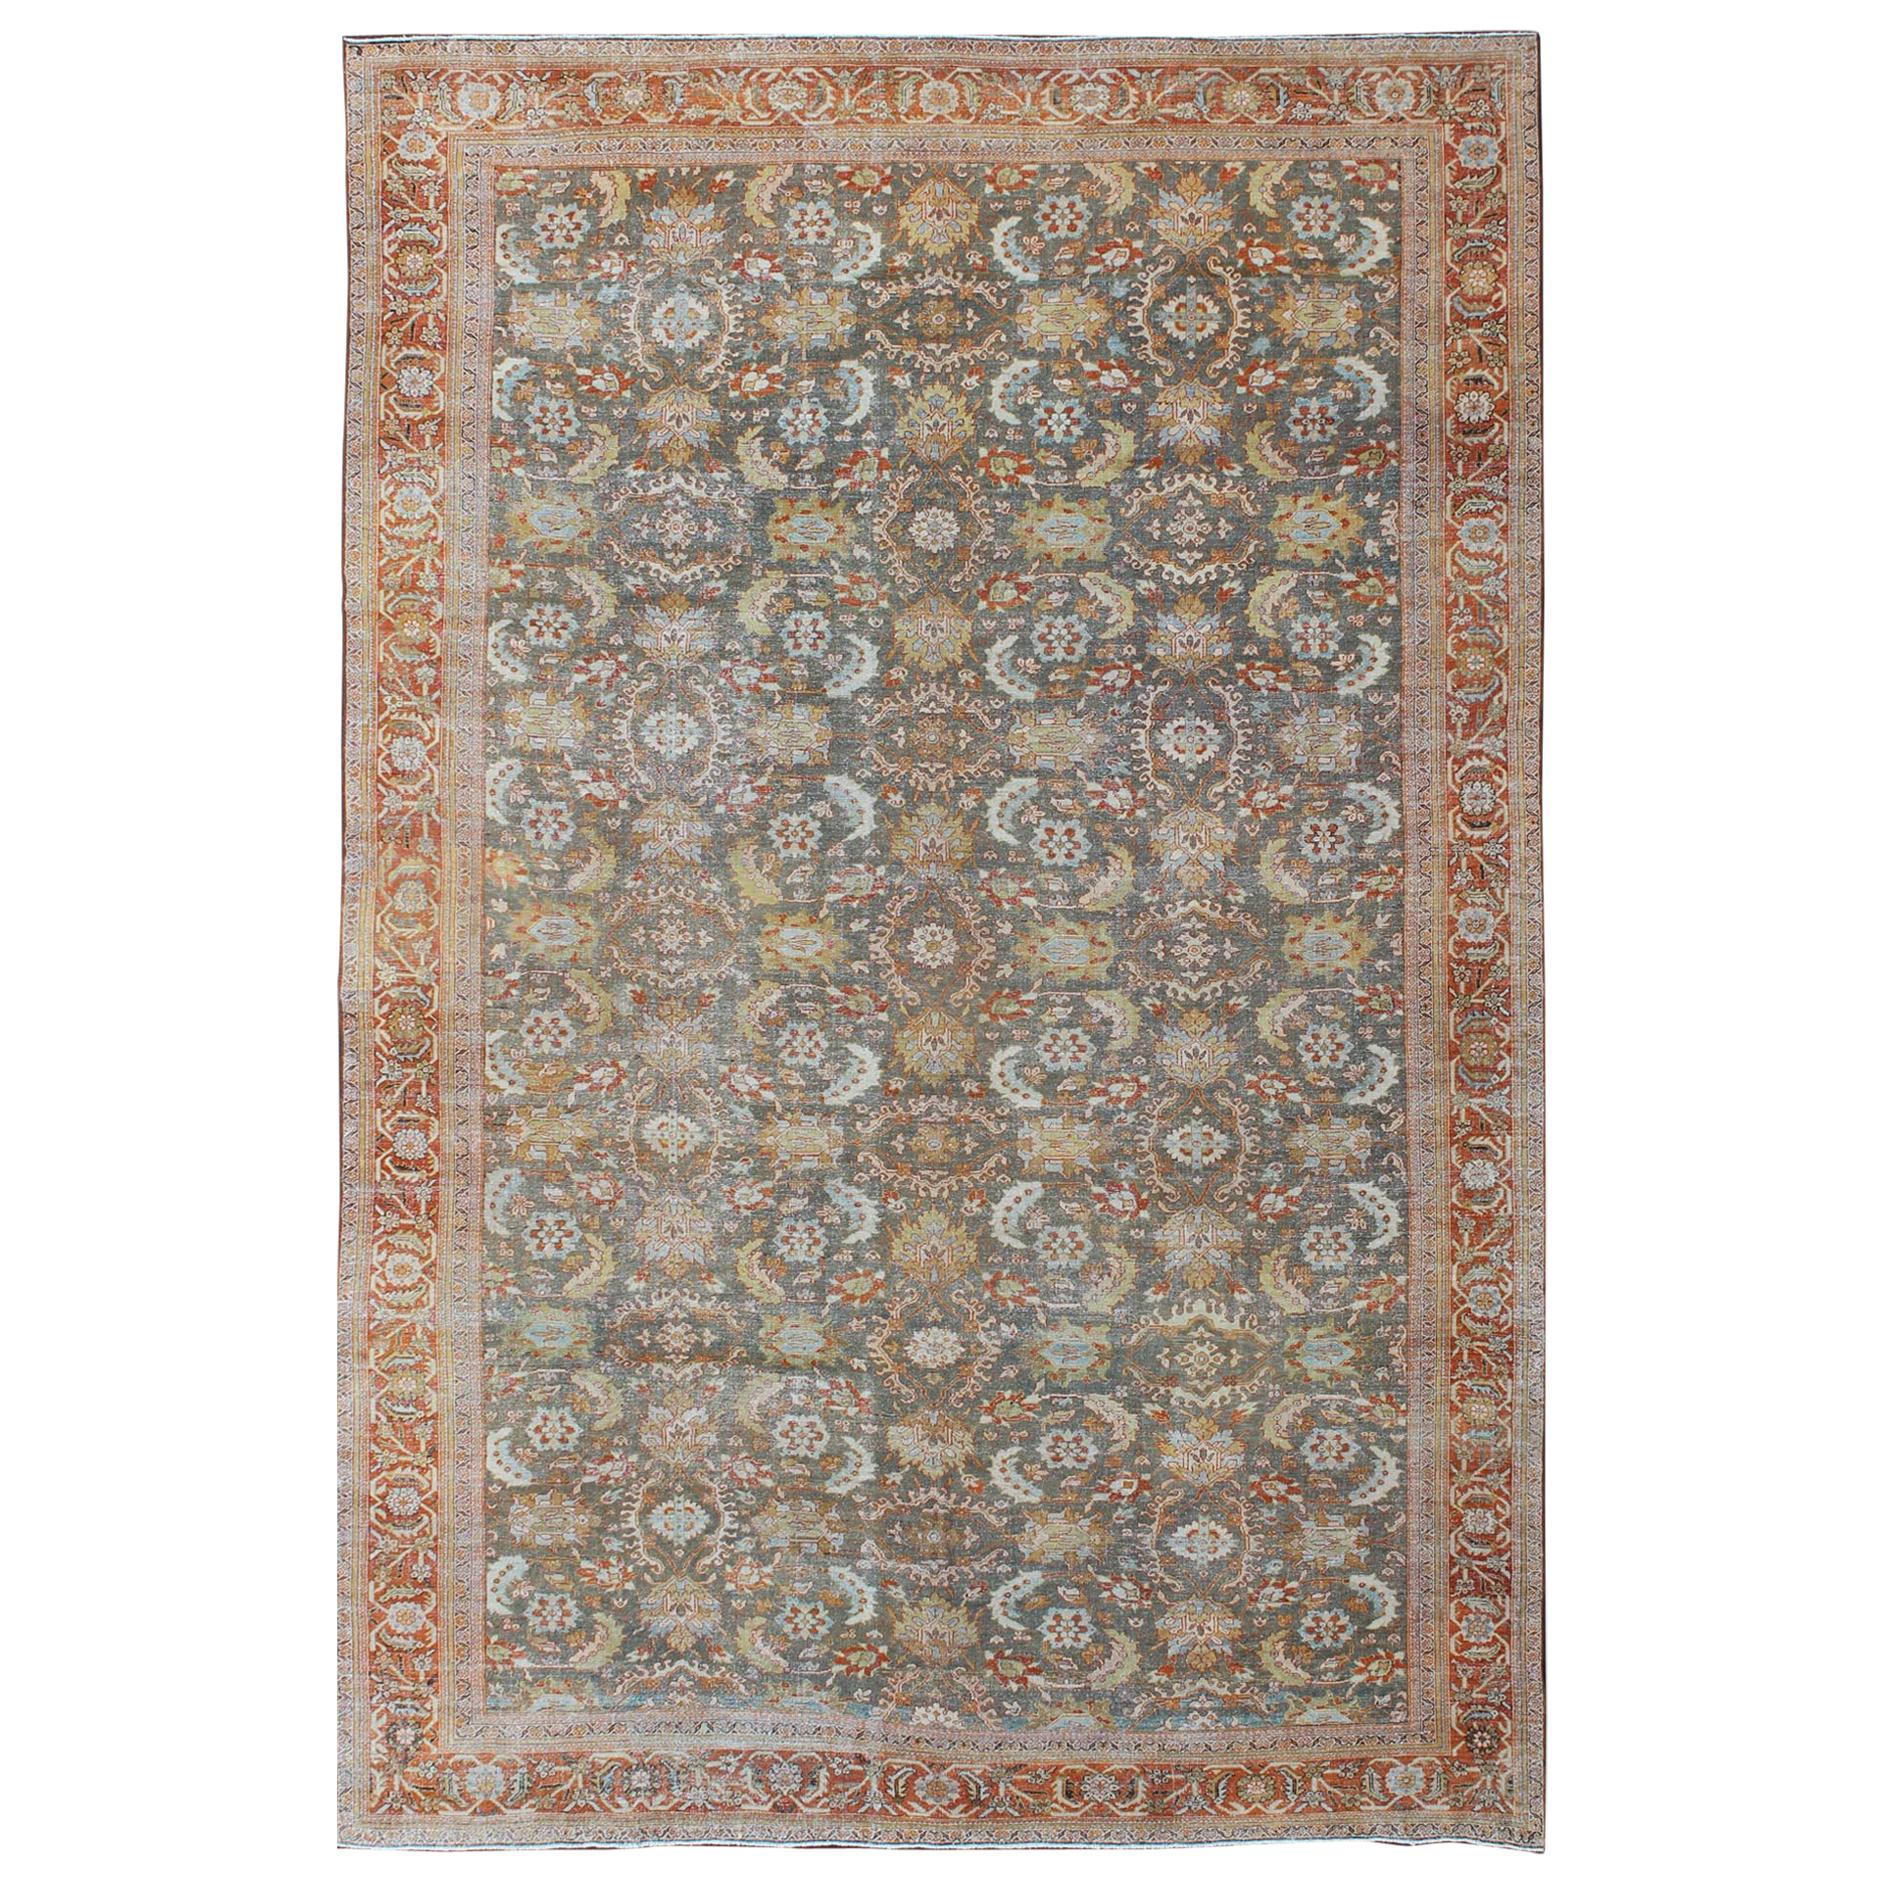 Large Antique Persian Sultanabad Rug in Gray, Gray/Green, Lime Green & Rust Red